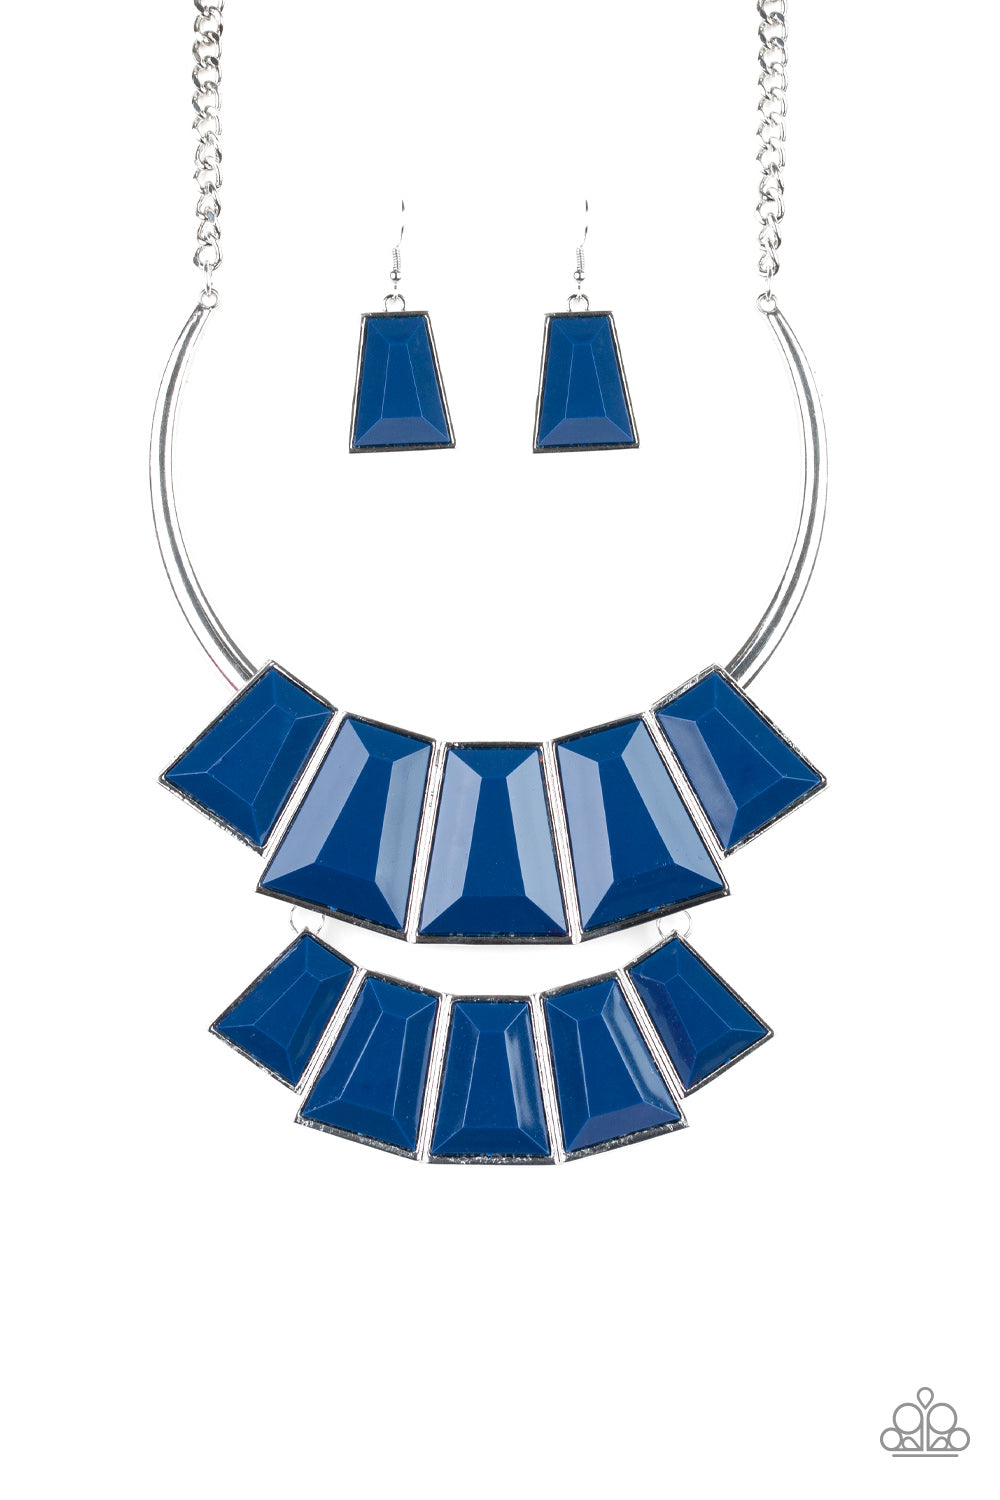 Lions, TIGRESS, and Bears - Blue Necklace